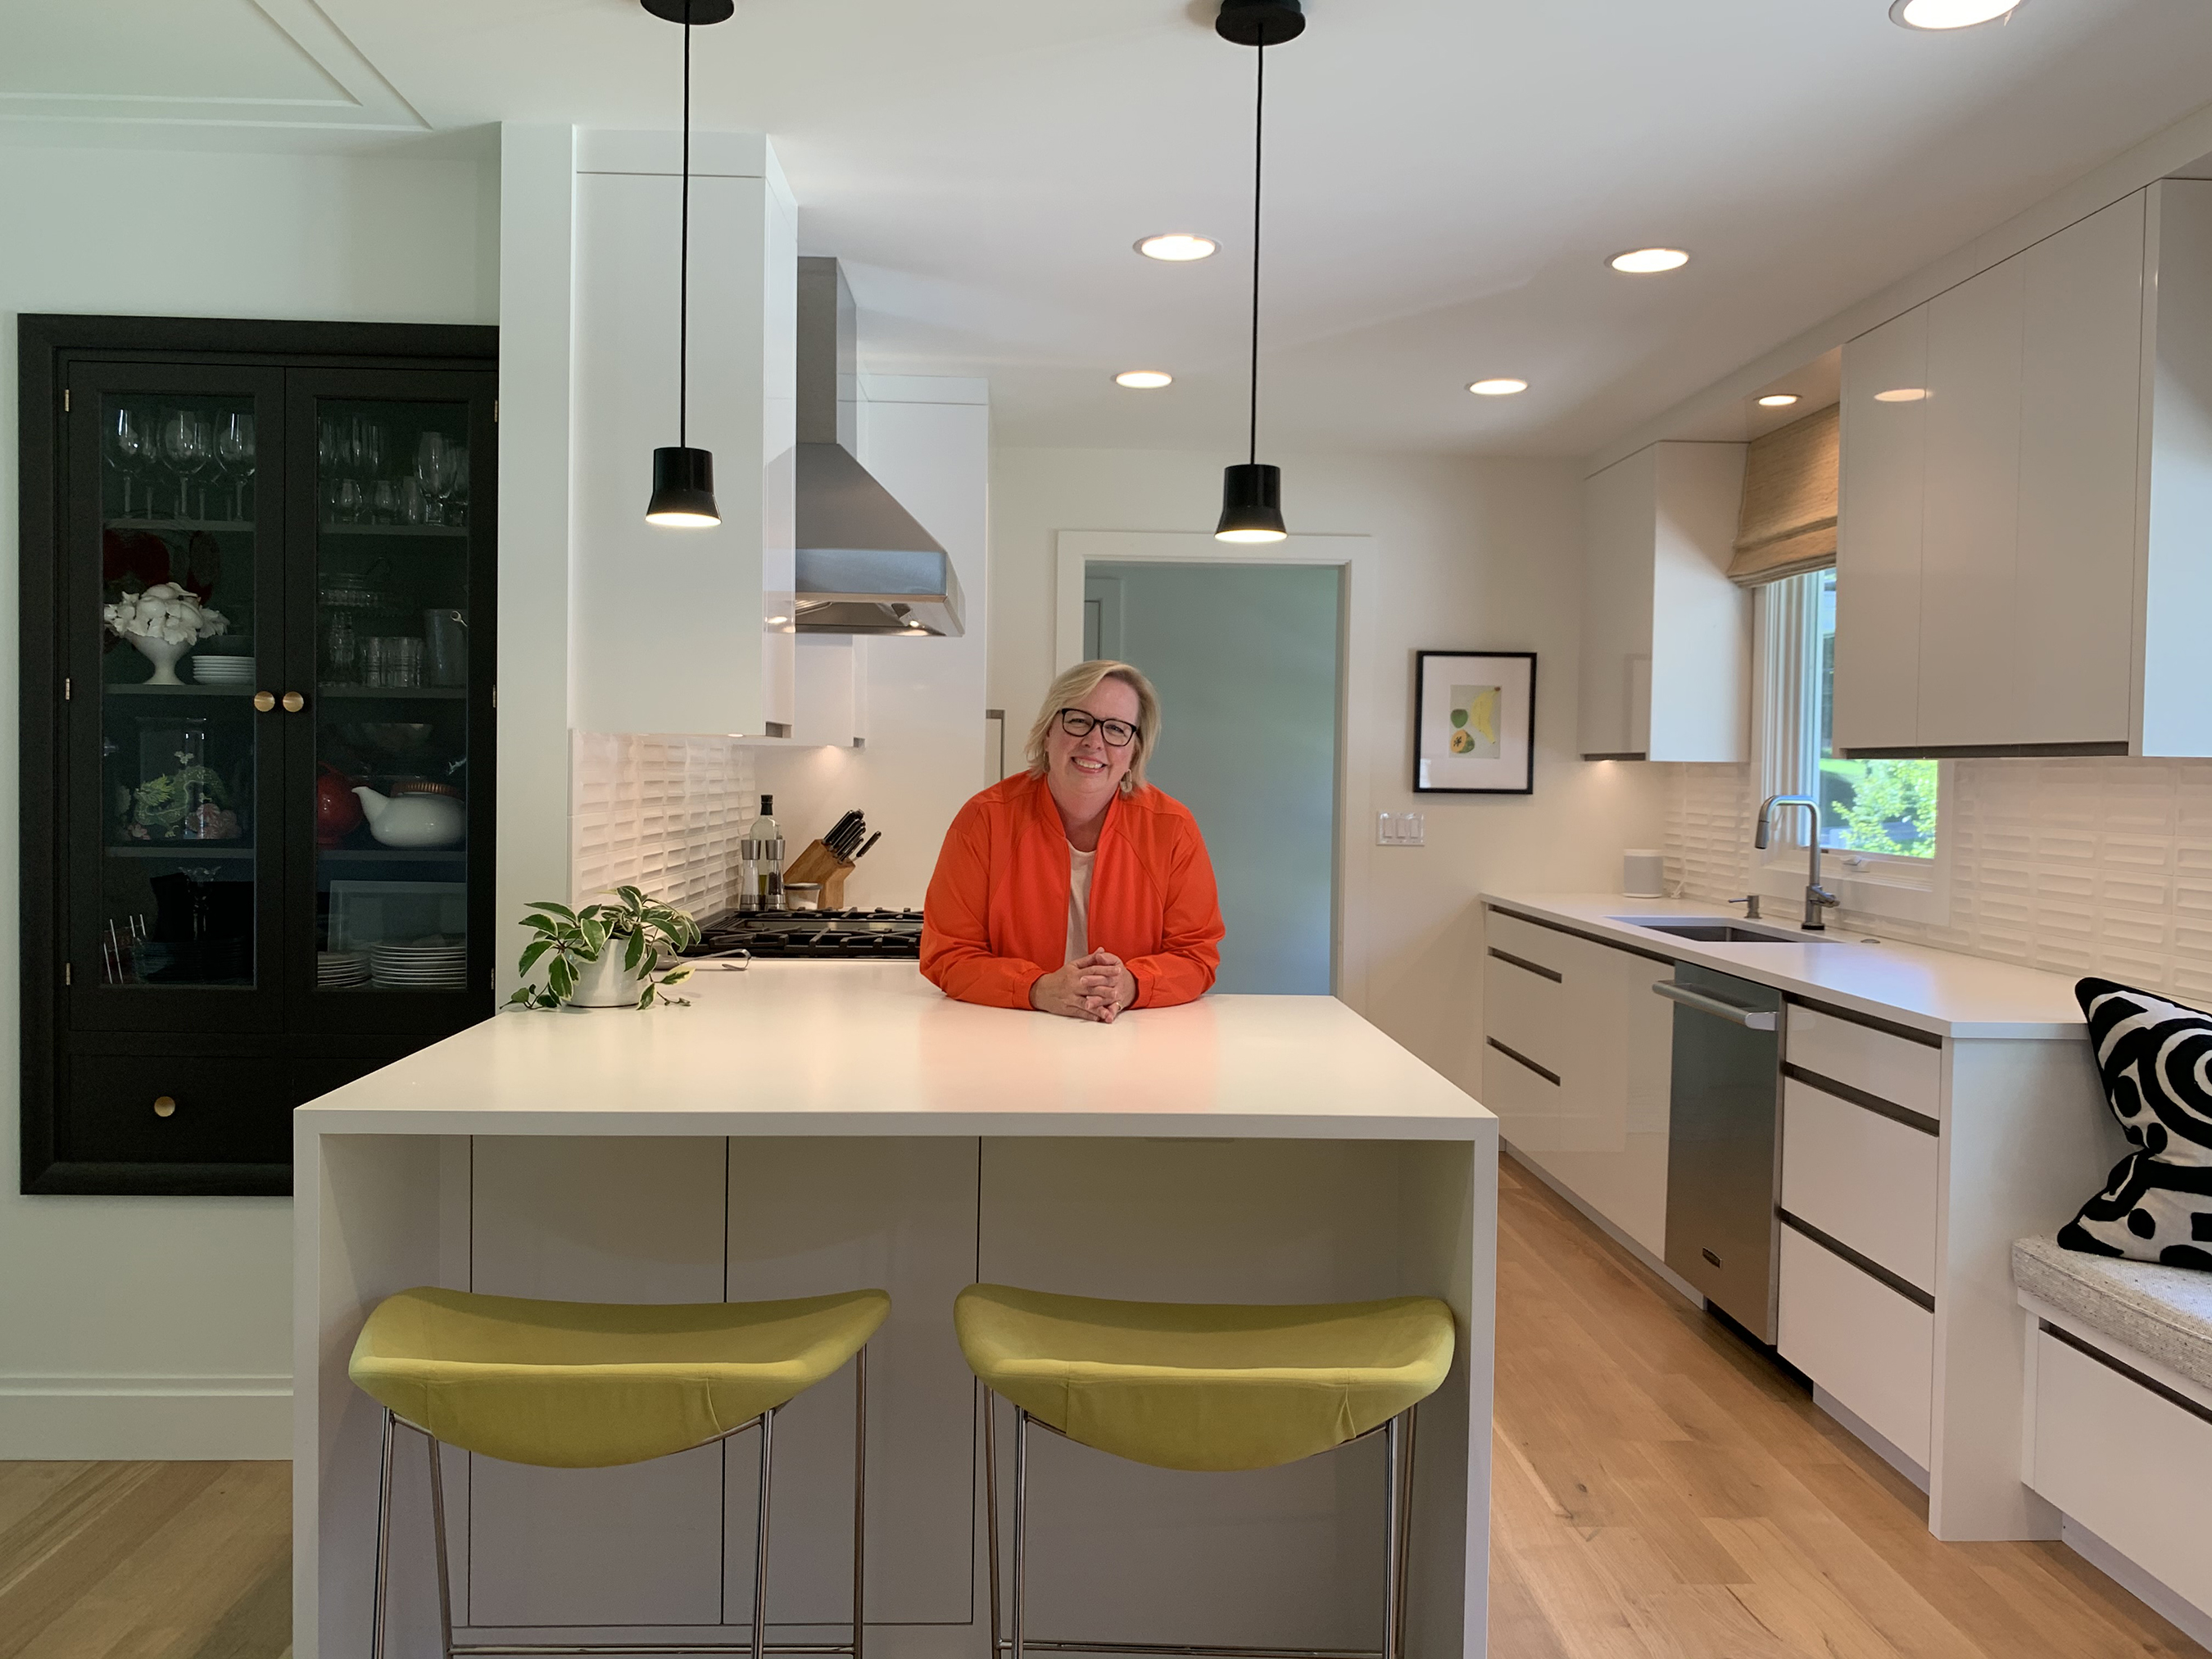 Interior designer Linda Engler uses her 36-inch Dual-Fuel Pro Range and Steam-Combi™ oven to achieve professional-level results in her home kitchen during episode 1 of the new culinary series.